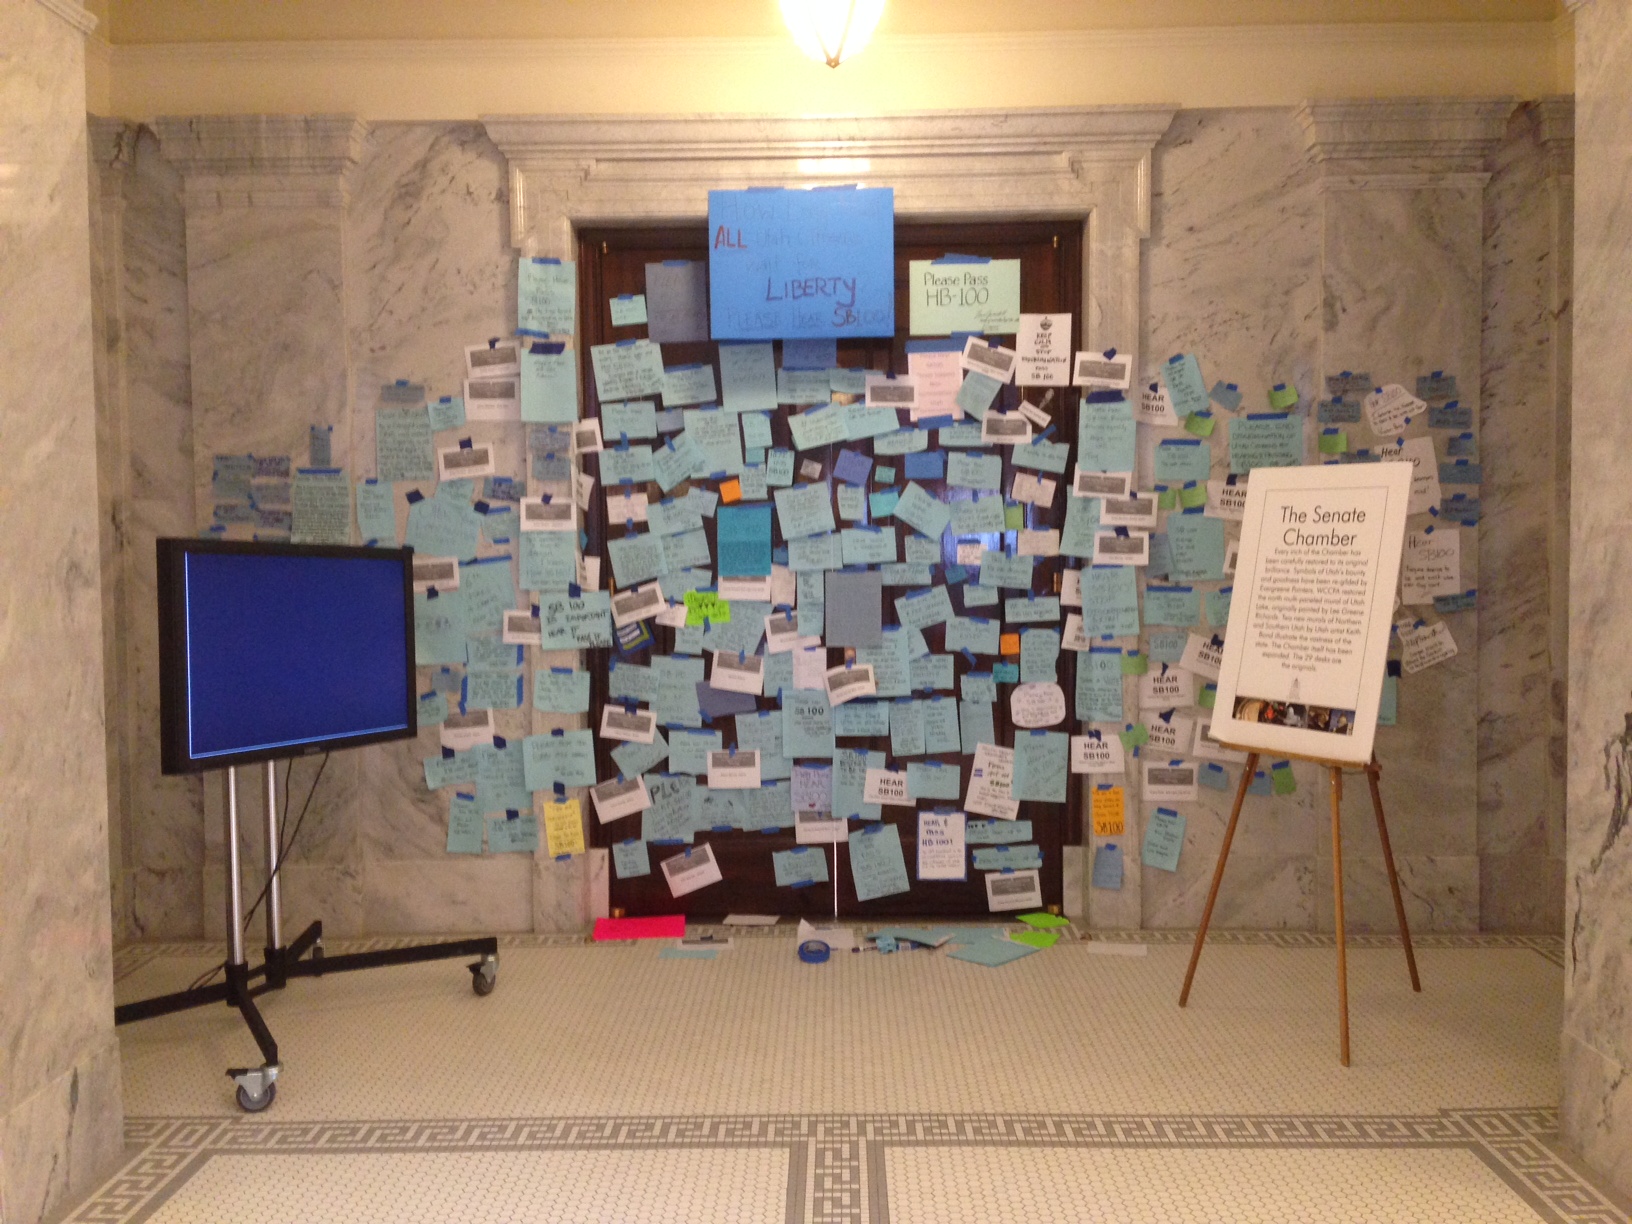 The main doors to the Utah Senate Chamber are covered in notes from supporters of SB 100, a bill that would make it illegal to discriminate against LGBT individuals in employment and housing in most cases.